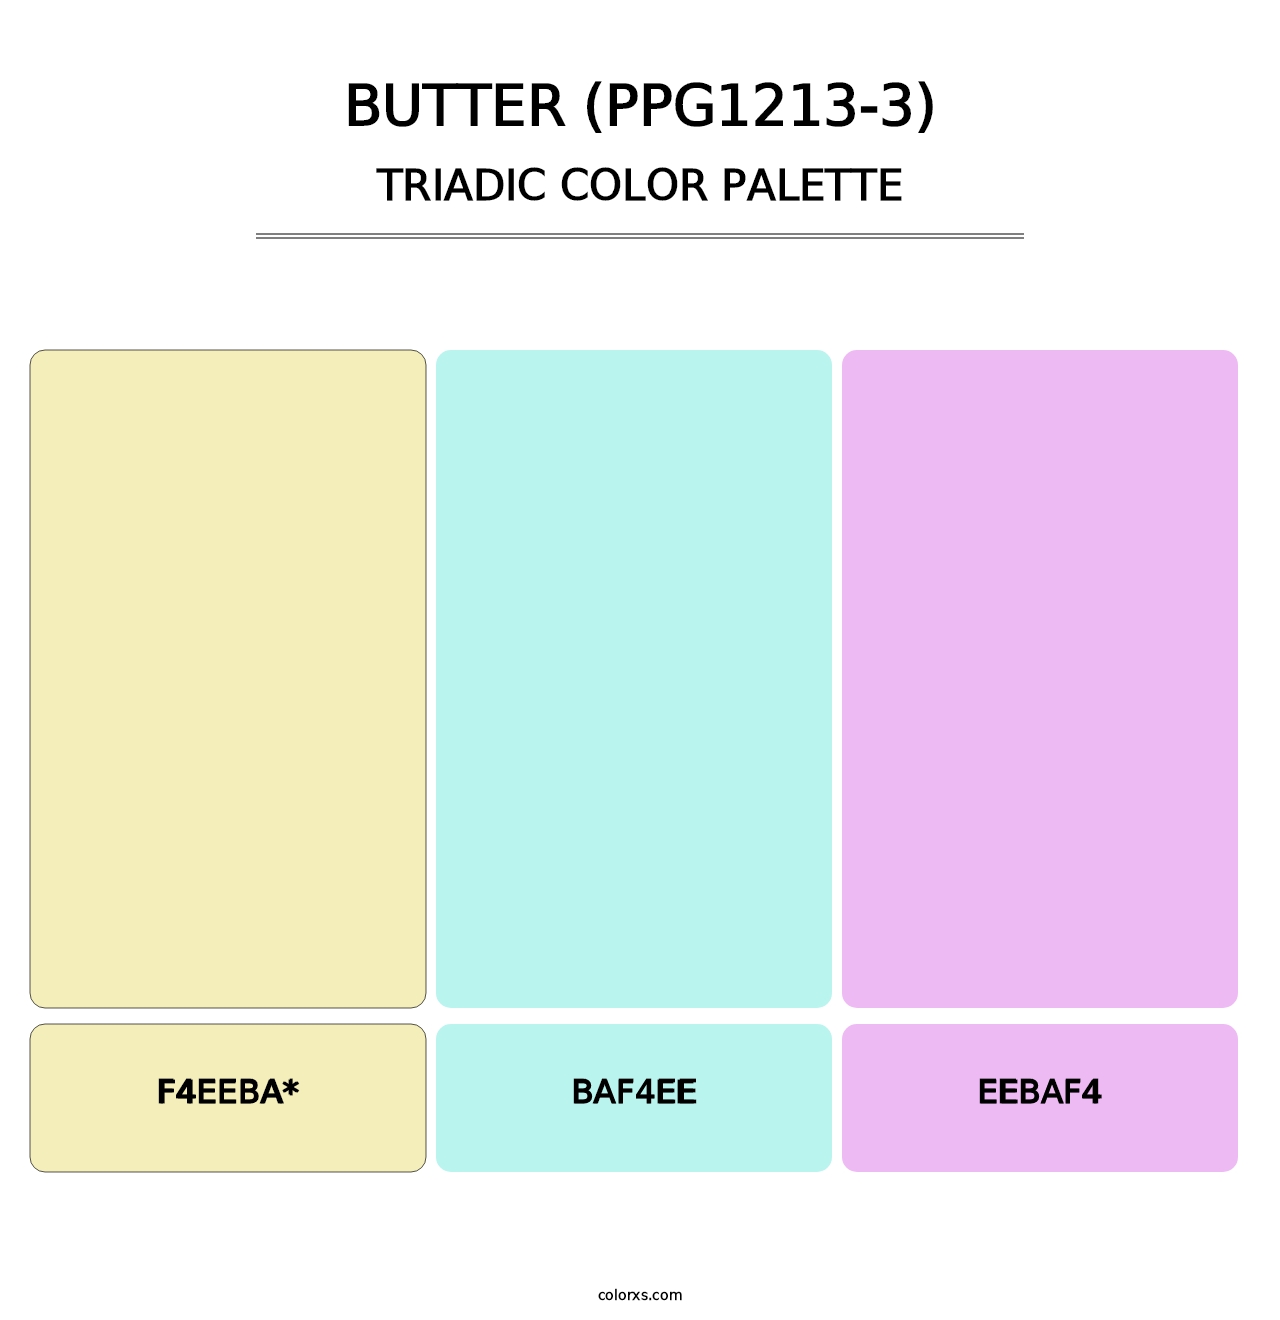 Butter (PPG1213-3) - Triadic Color Palette